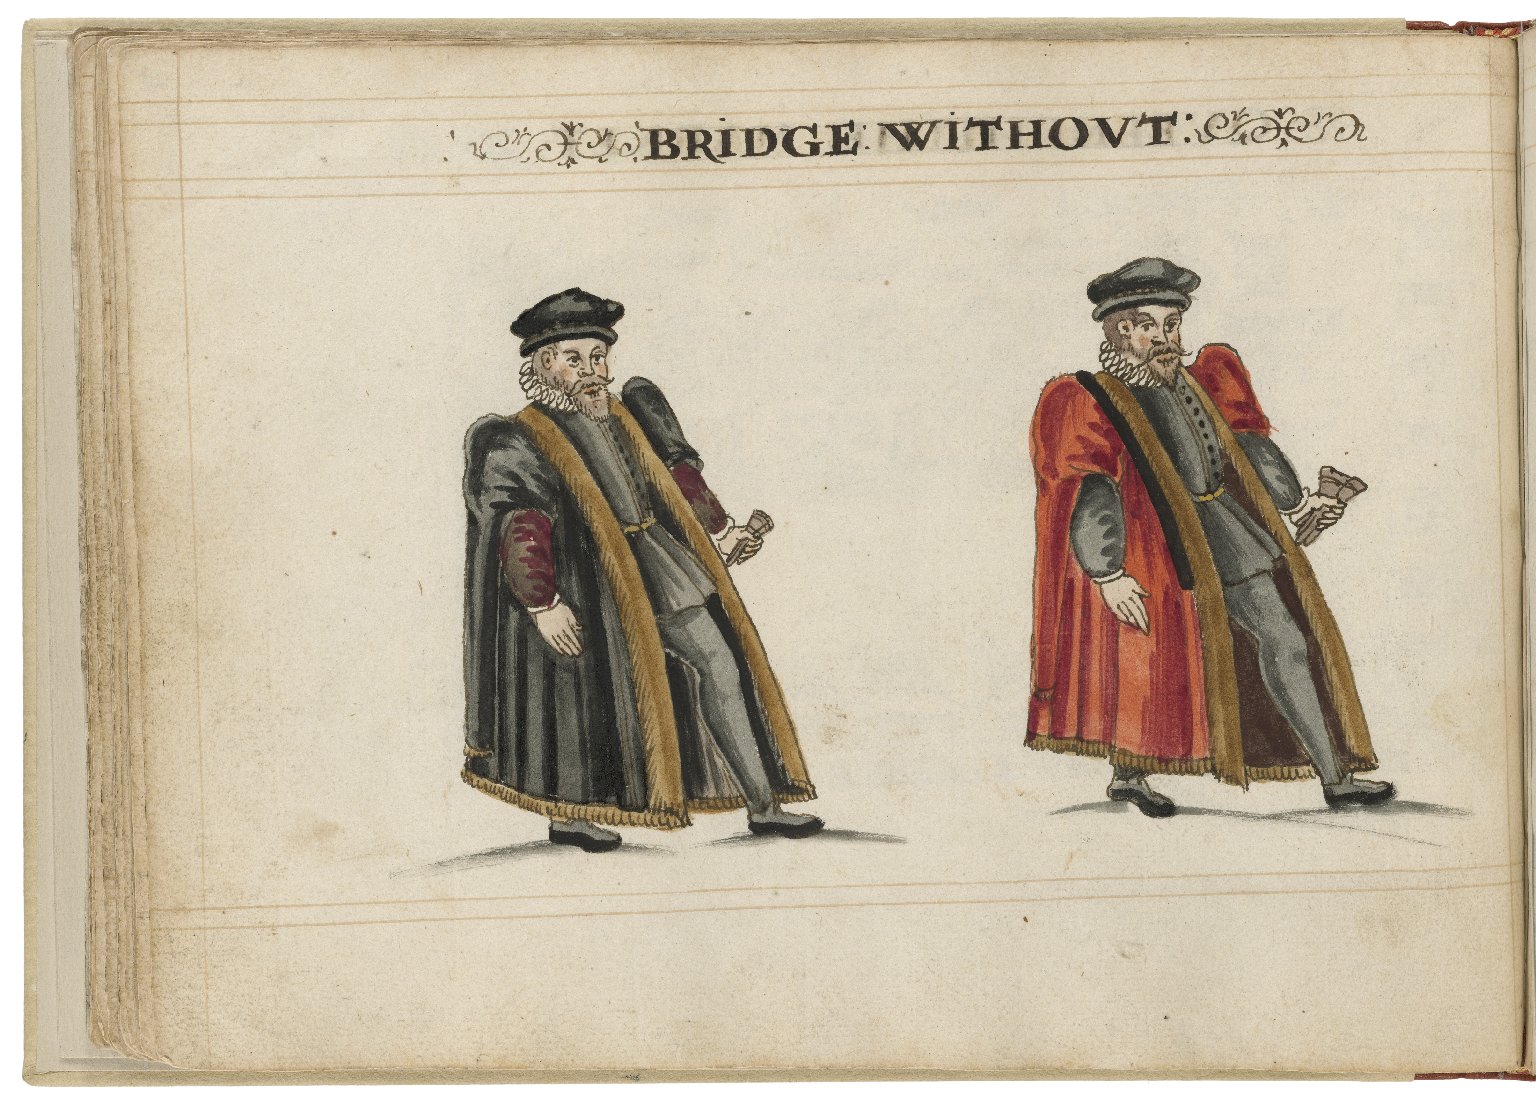 Watercolour painting of the alderman and deputy in charge of Bridge Without Ward by Hugh Alley. Image courtesy of the Folger Digital Image Collection.